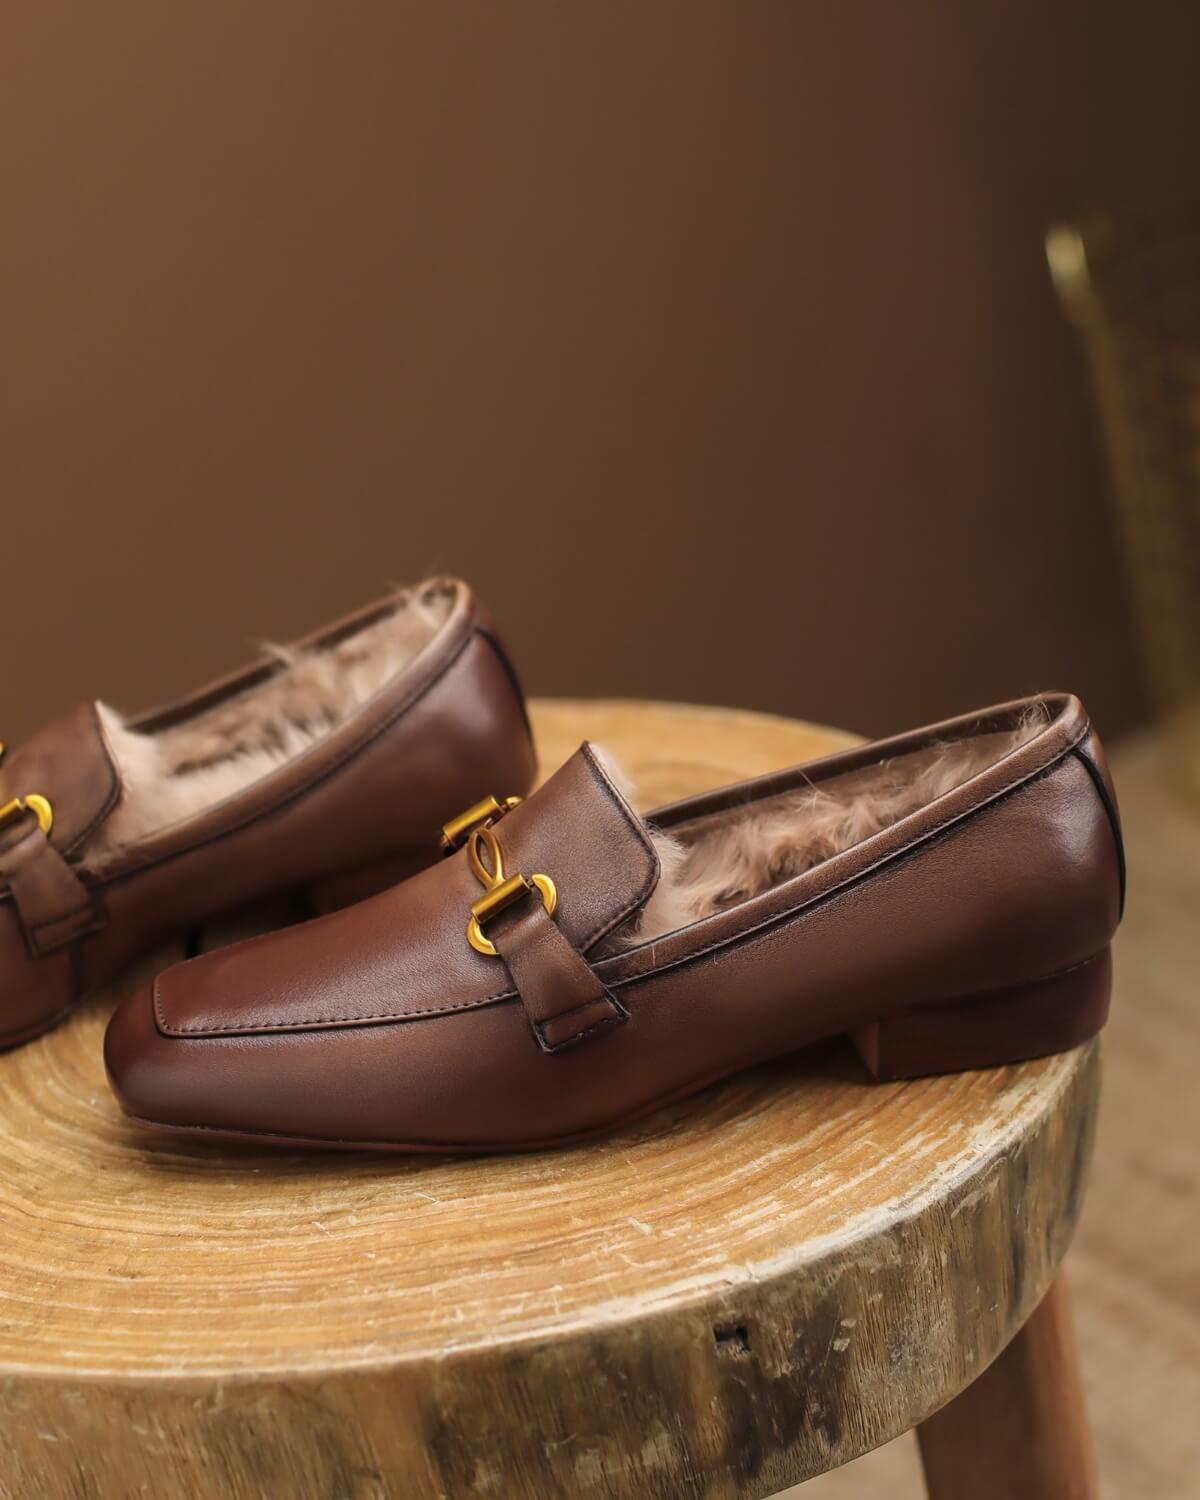 Hart-Fur-Lined-Brown-Leather-Loafers-2